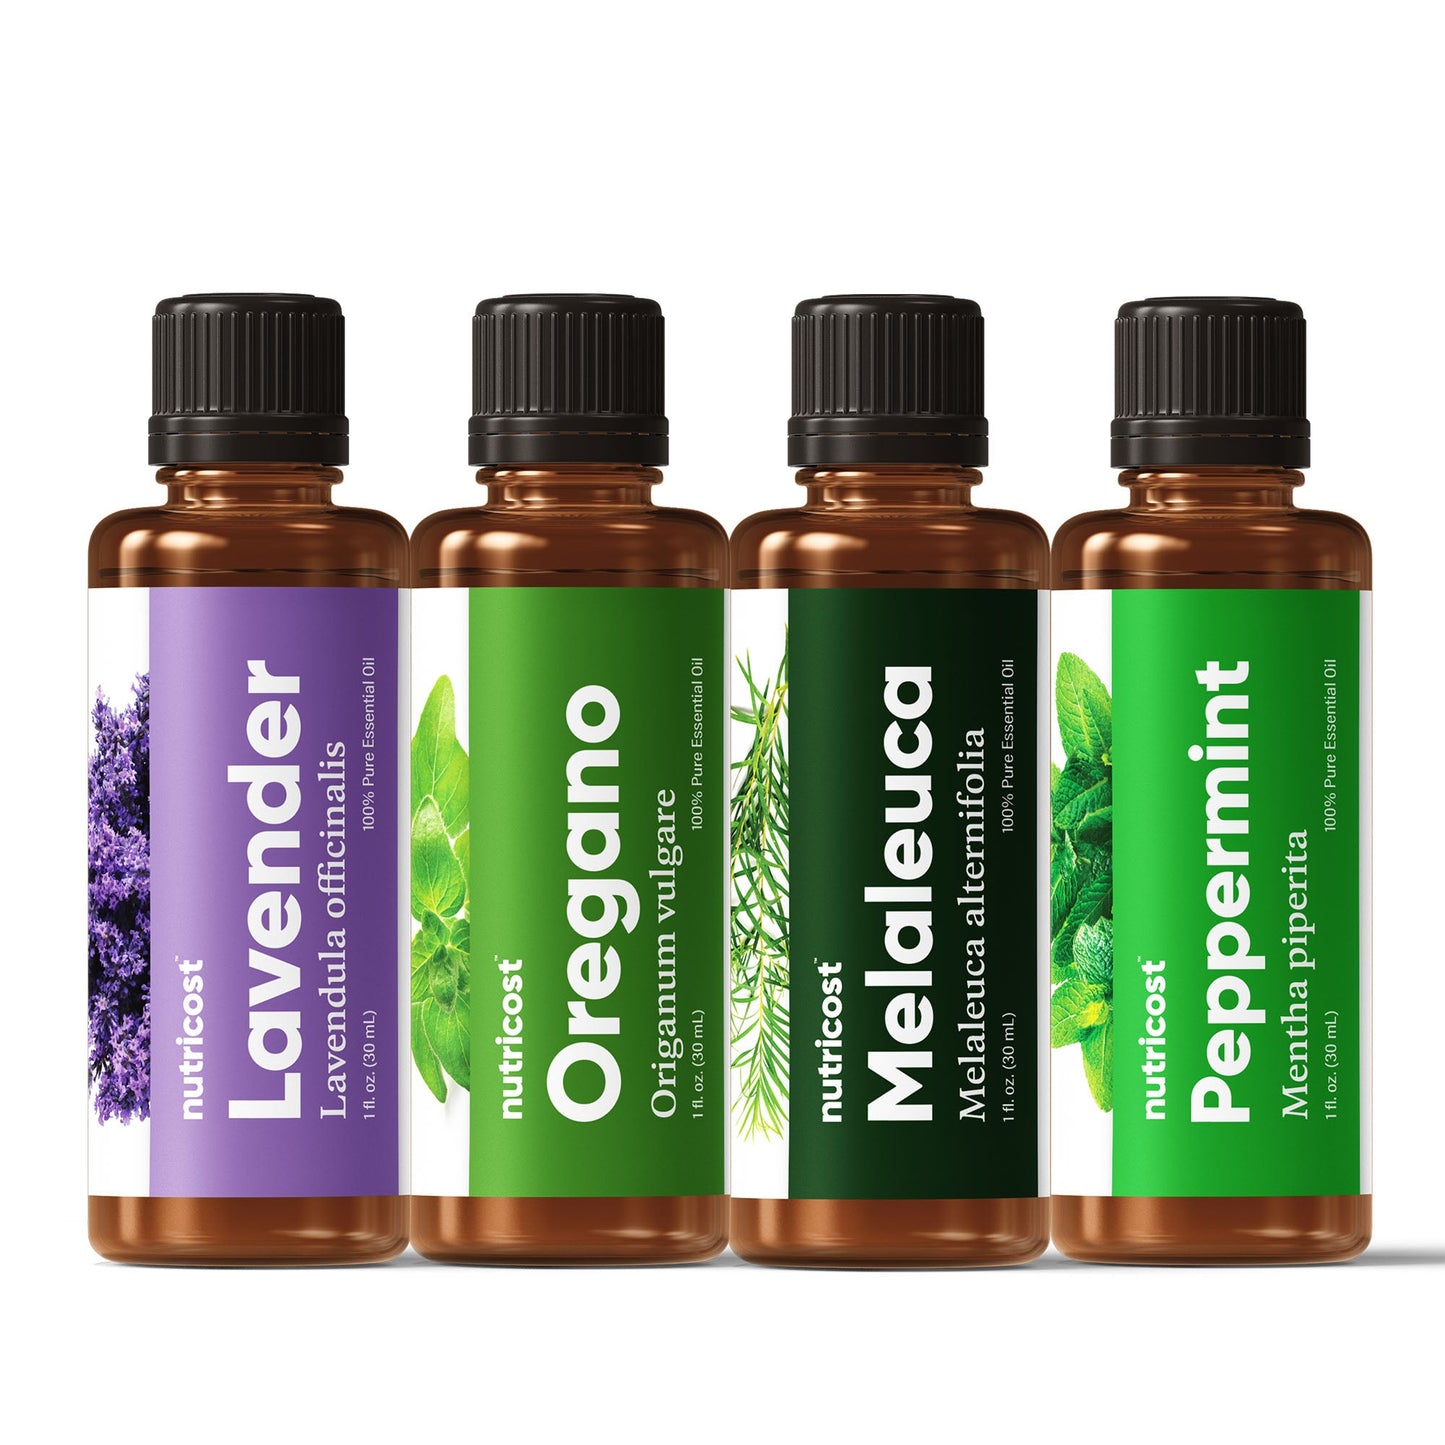 Nutricost Essential Oils Variety Pack (4 Count) - Lavender, Peppermint, Melaleuca, Oregano